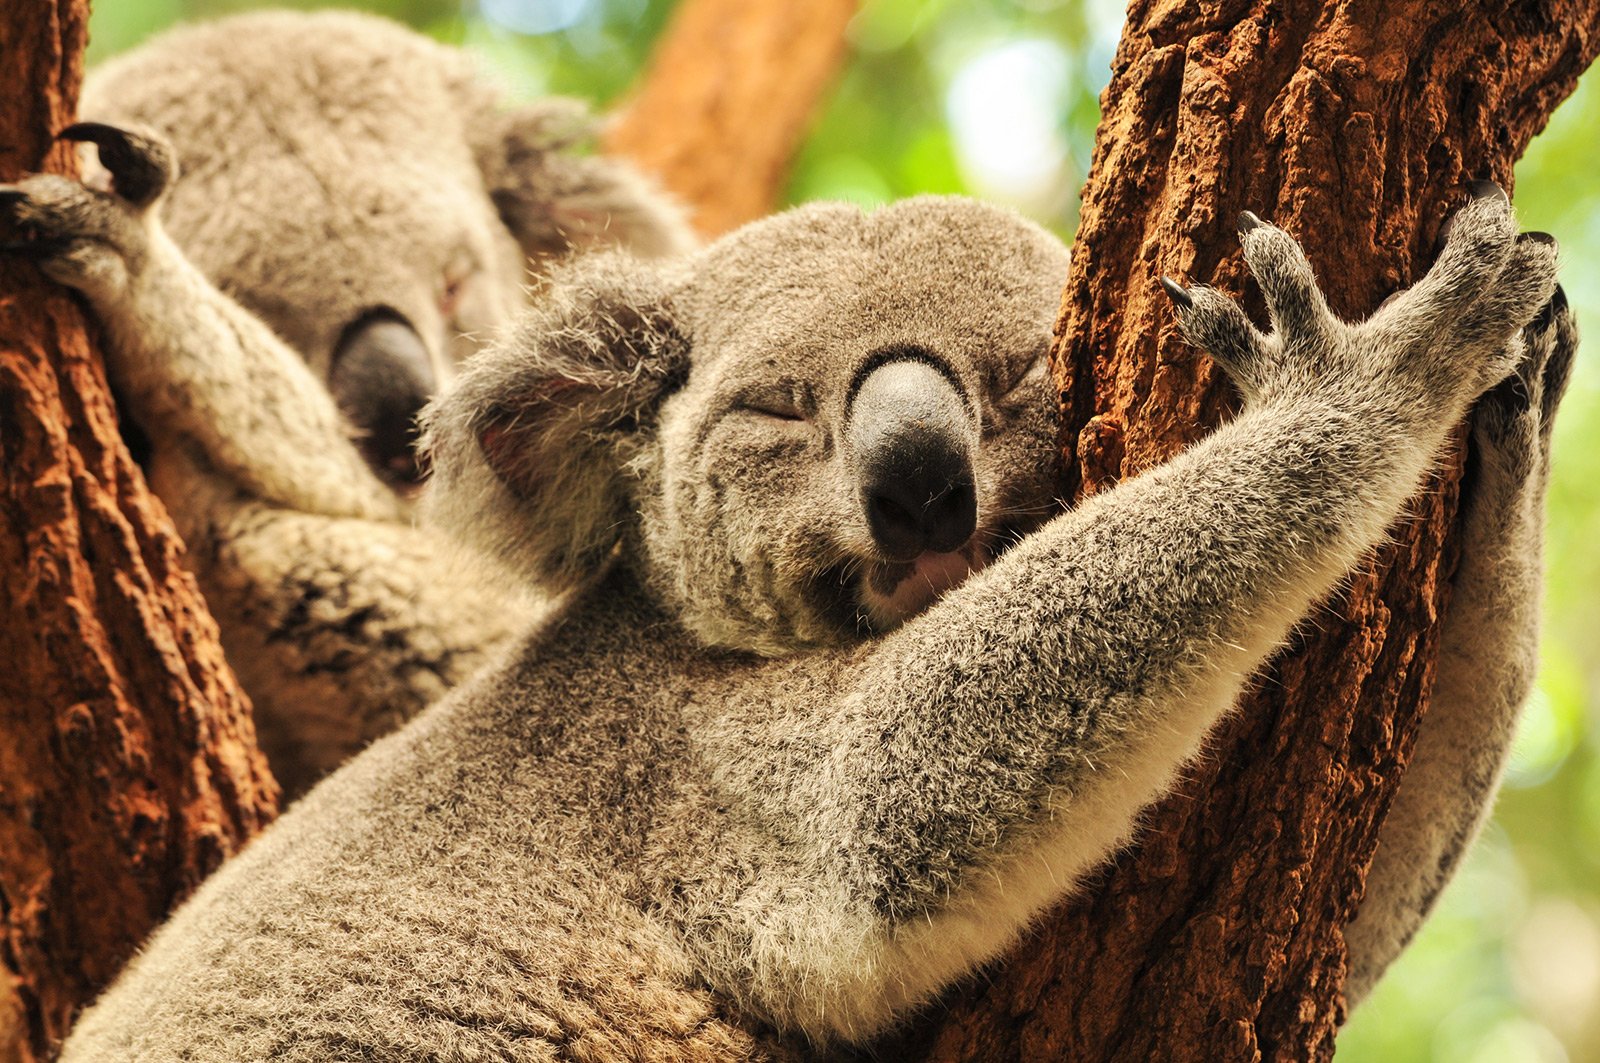 How to see koalas in Sydney